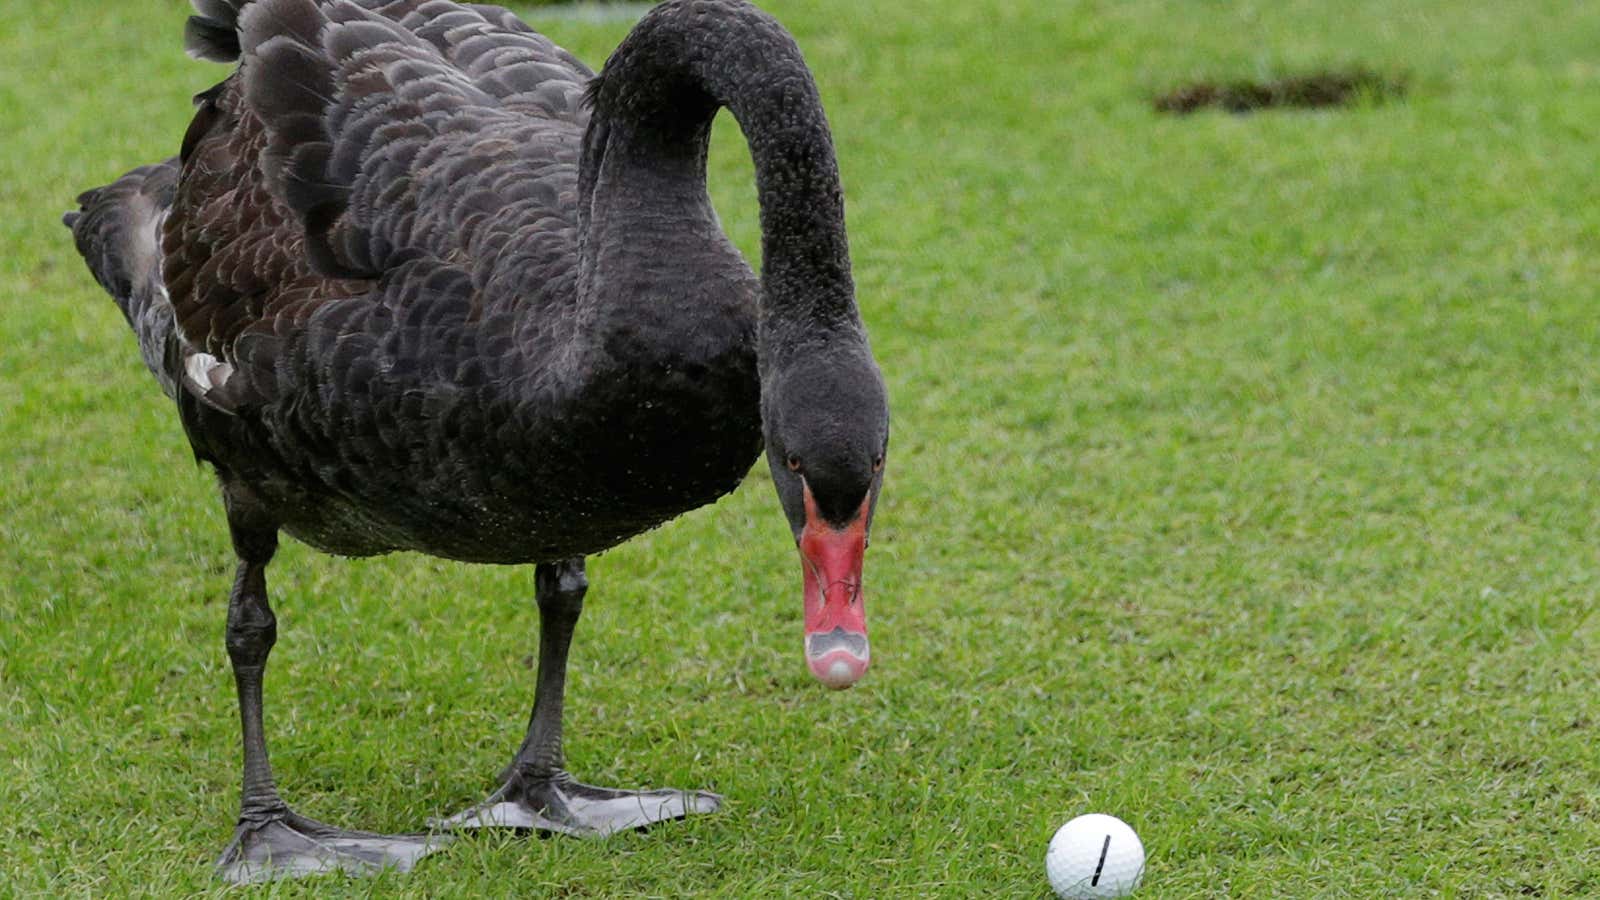 Swan song for a populist golf ball?